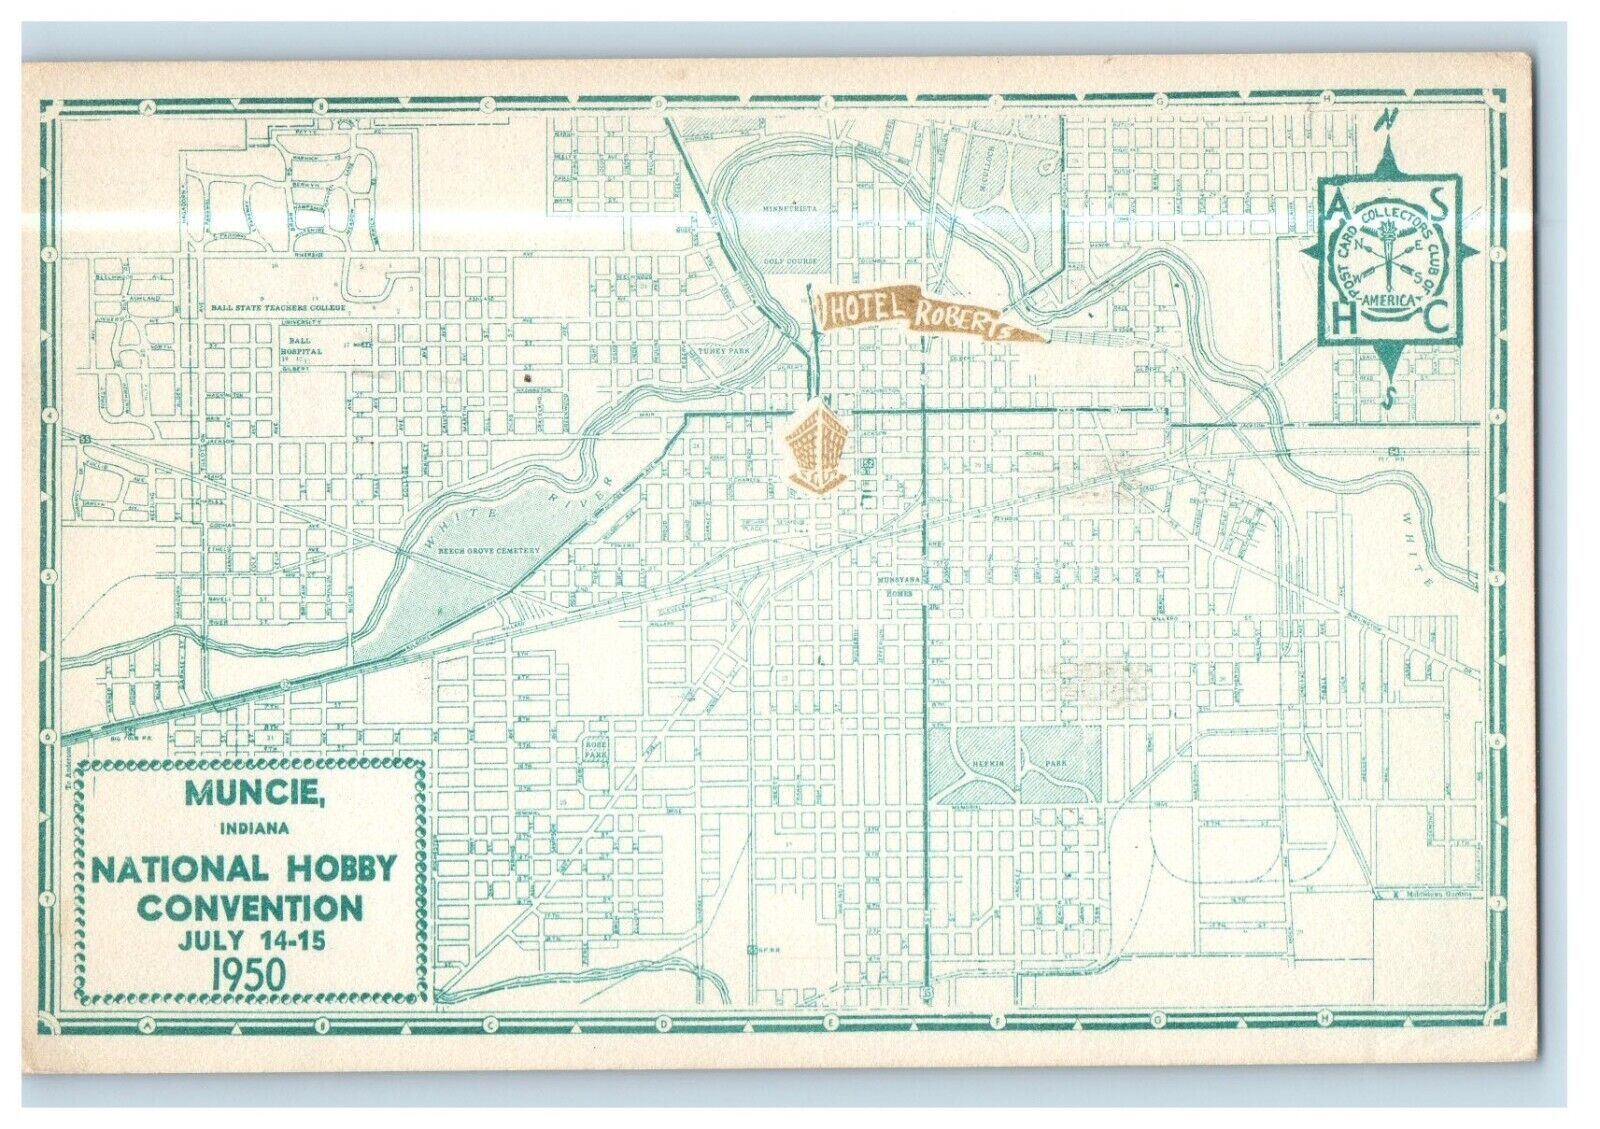 1950 National Hobby Convention Map Muncie Indiana IN Posted Vintage Postcard